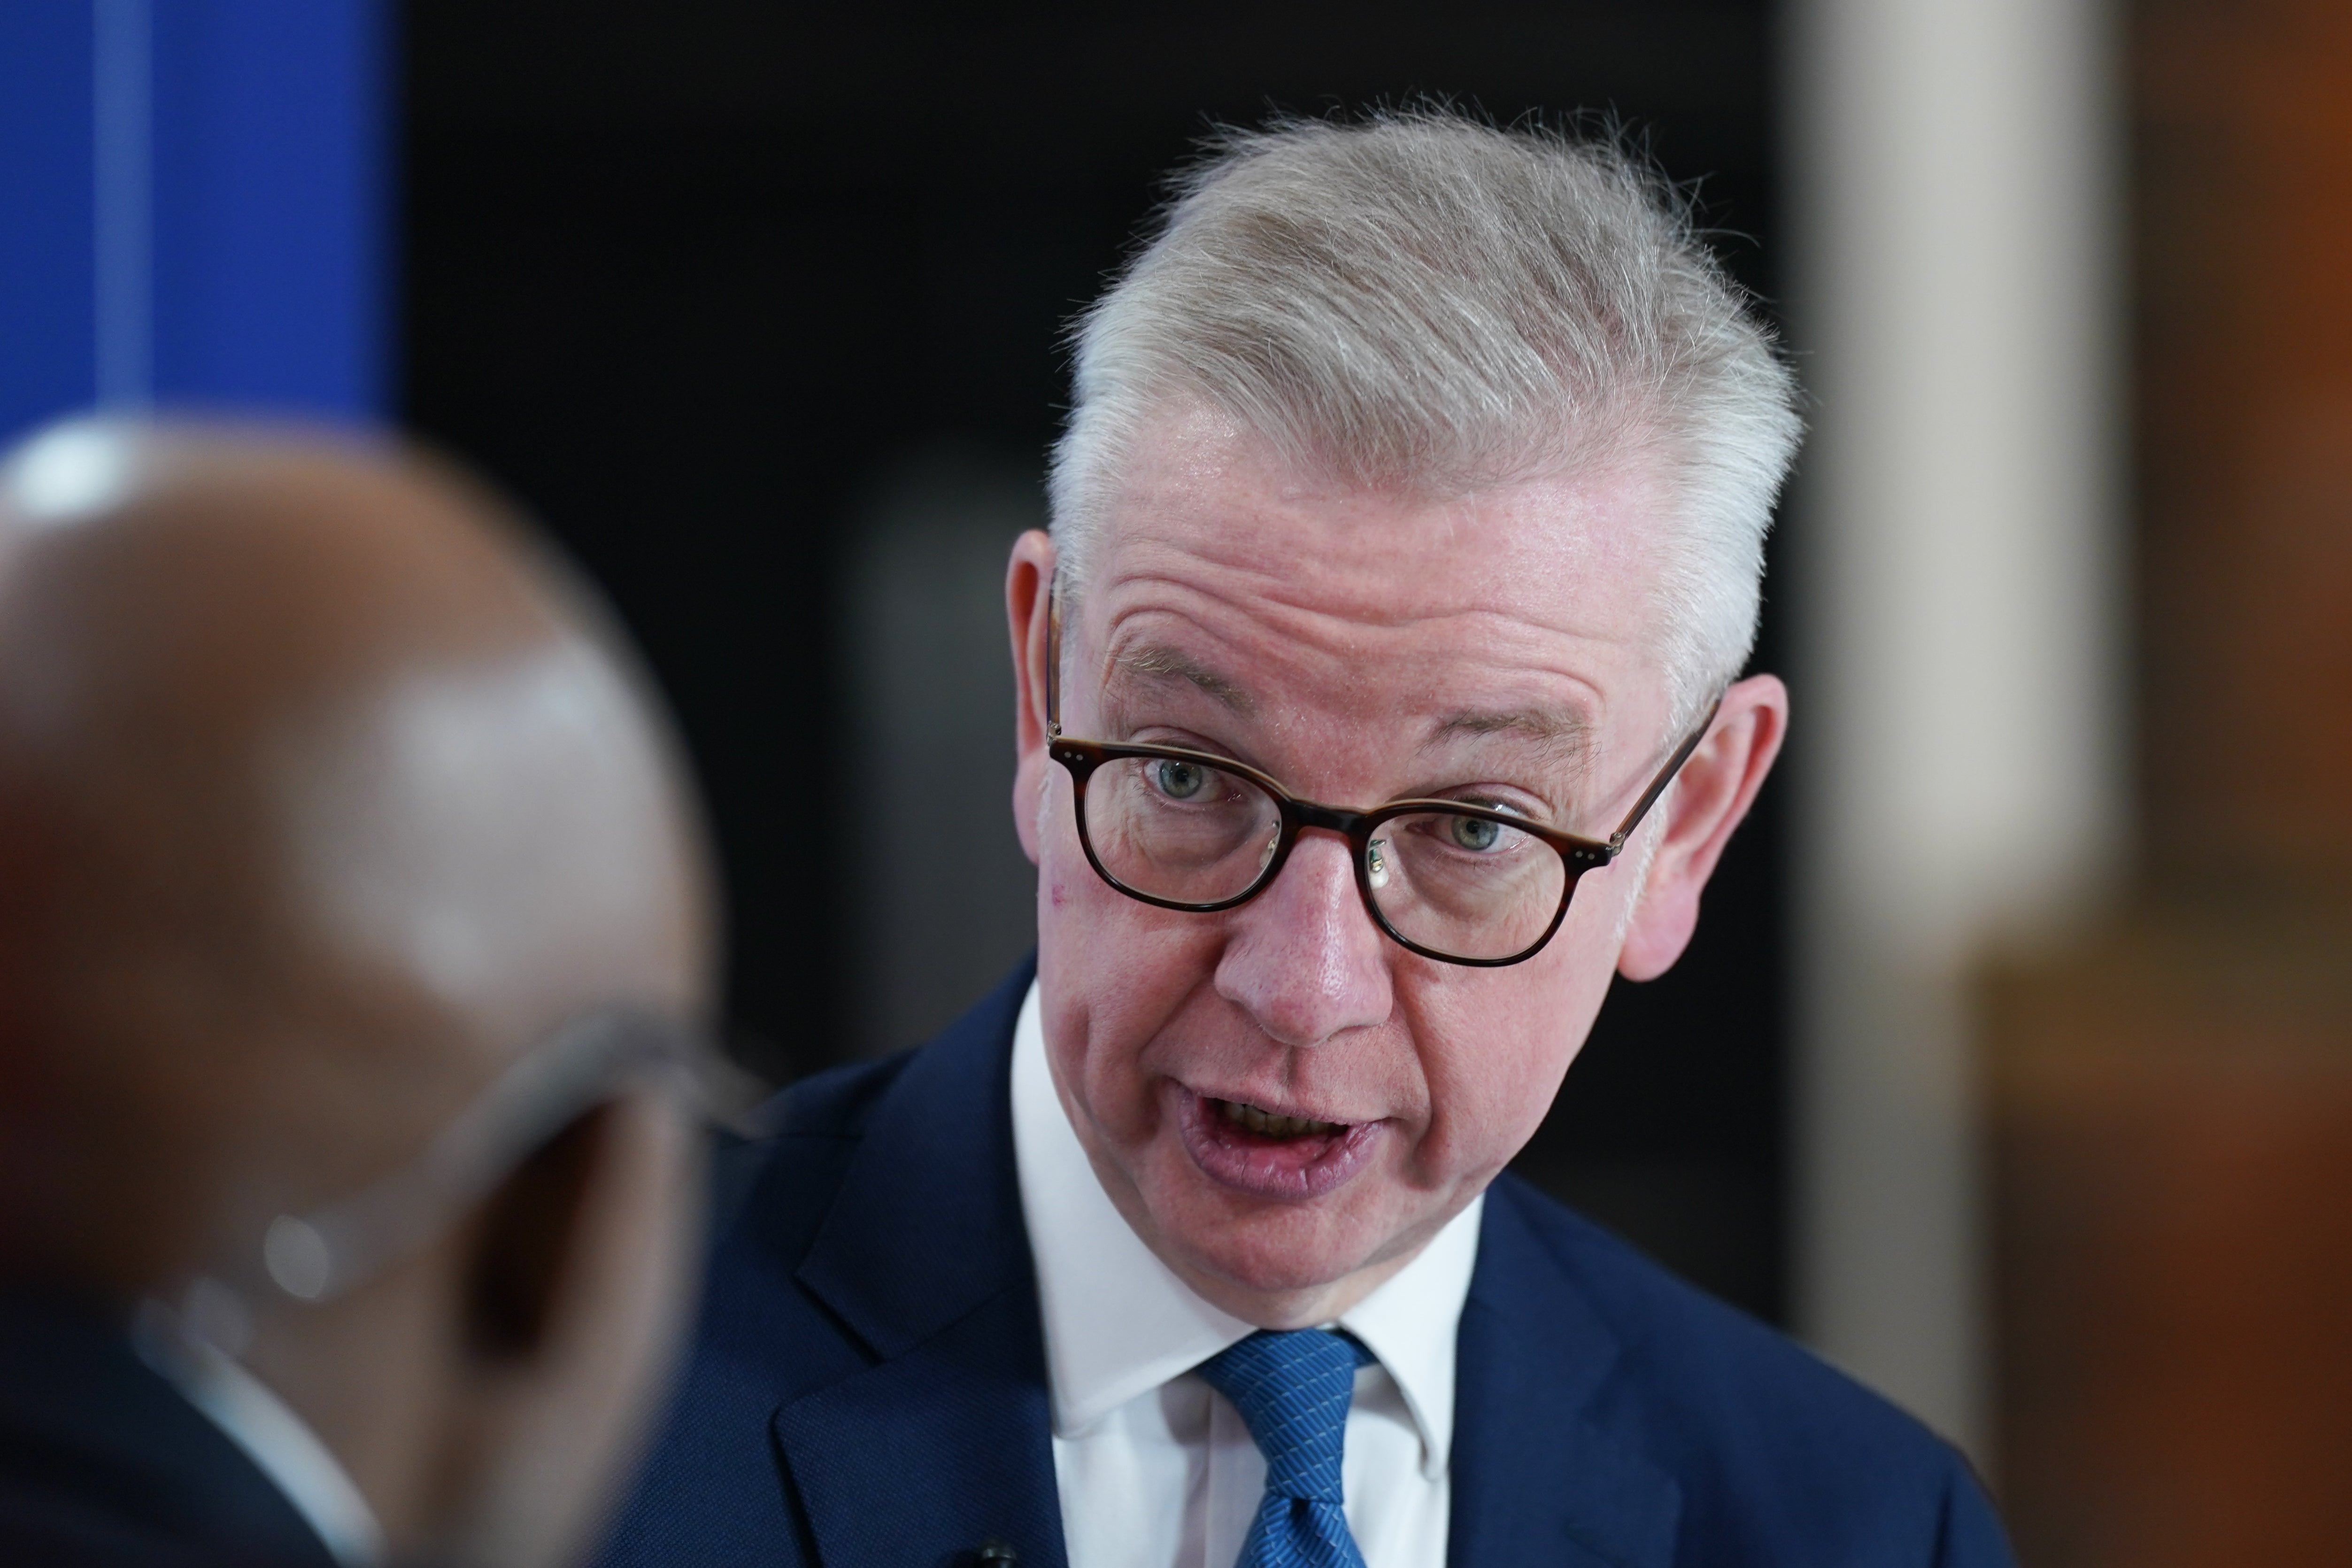 Michael Gove said he wanted taxes to come down before election, and claimed quitting the ECHR should be an ‘option’ for No 10